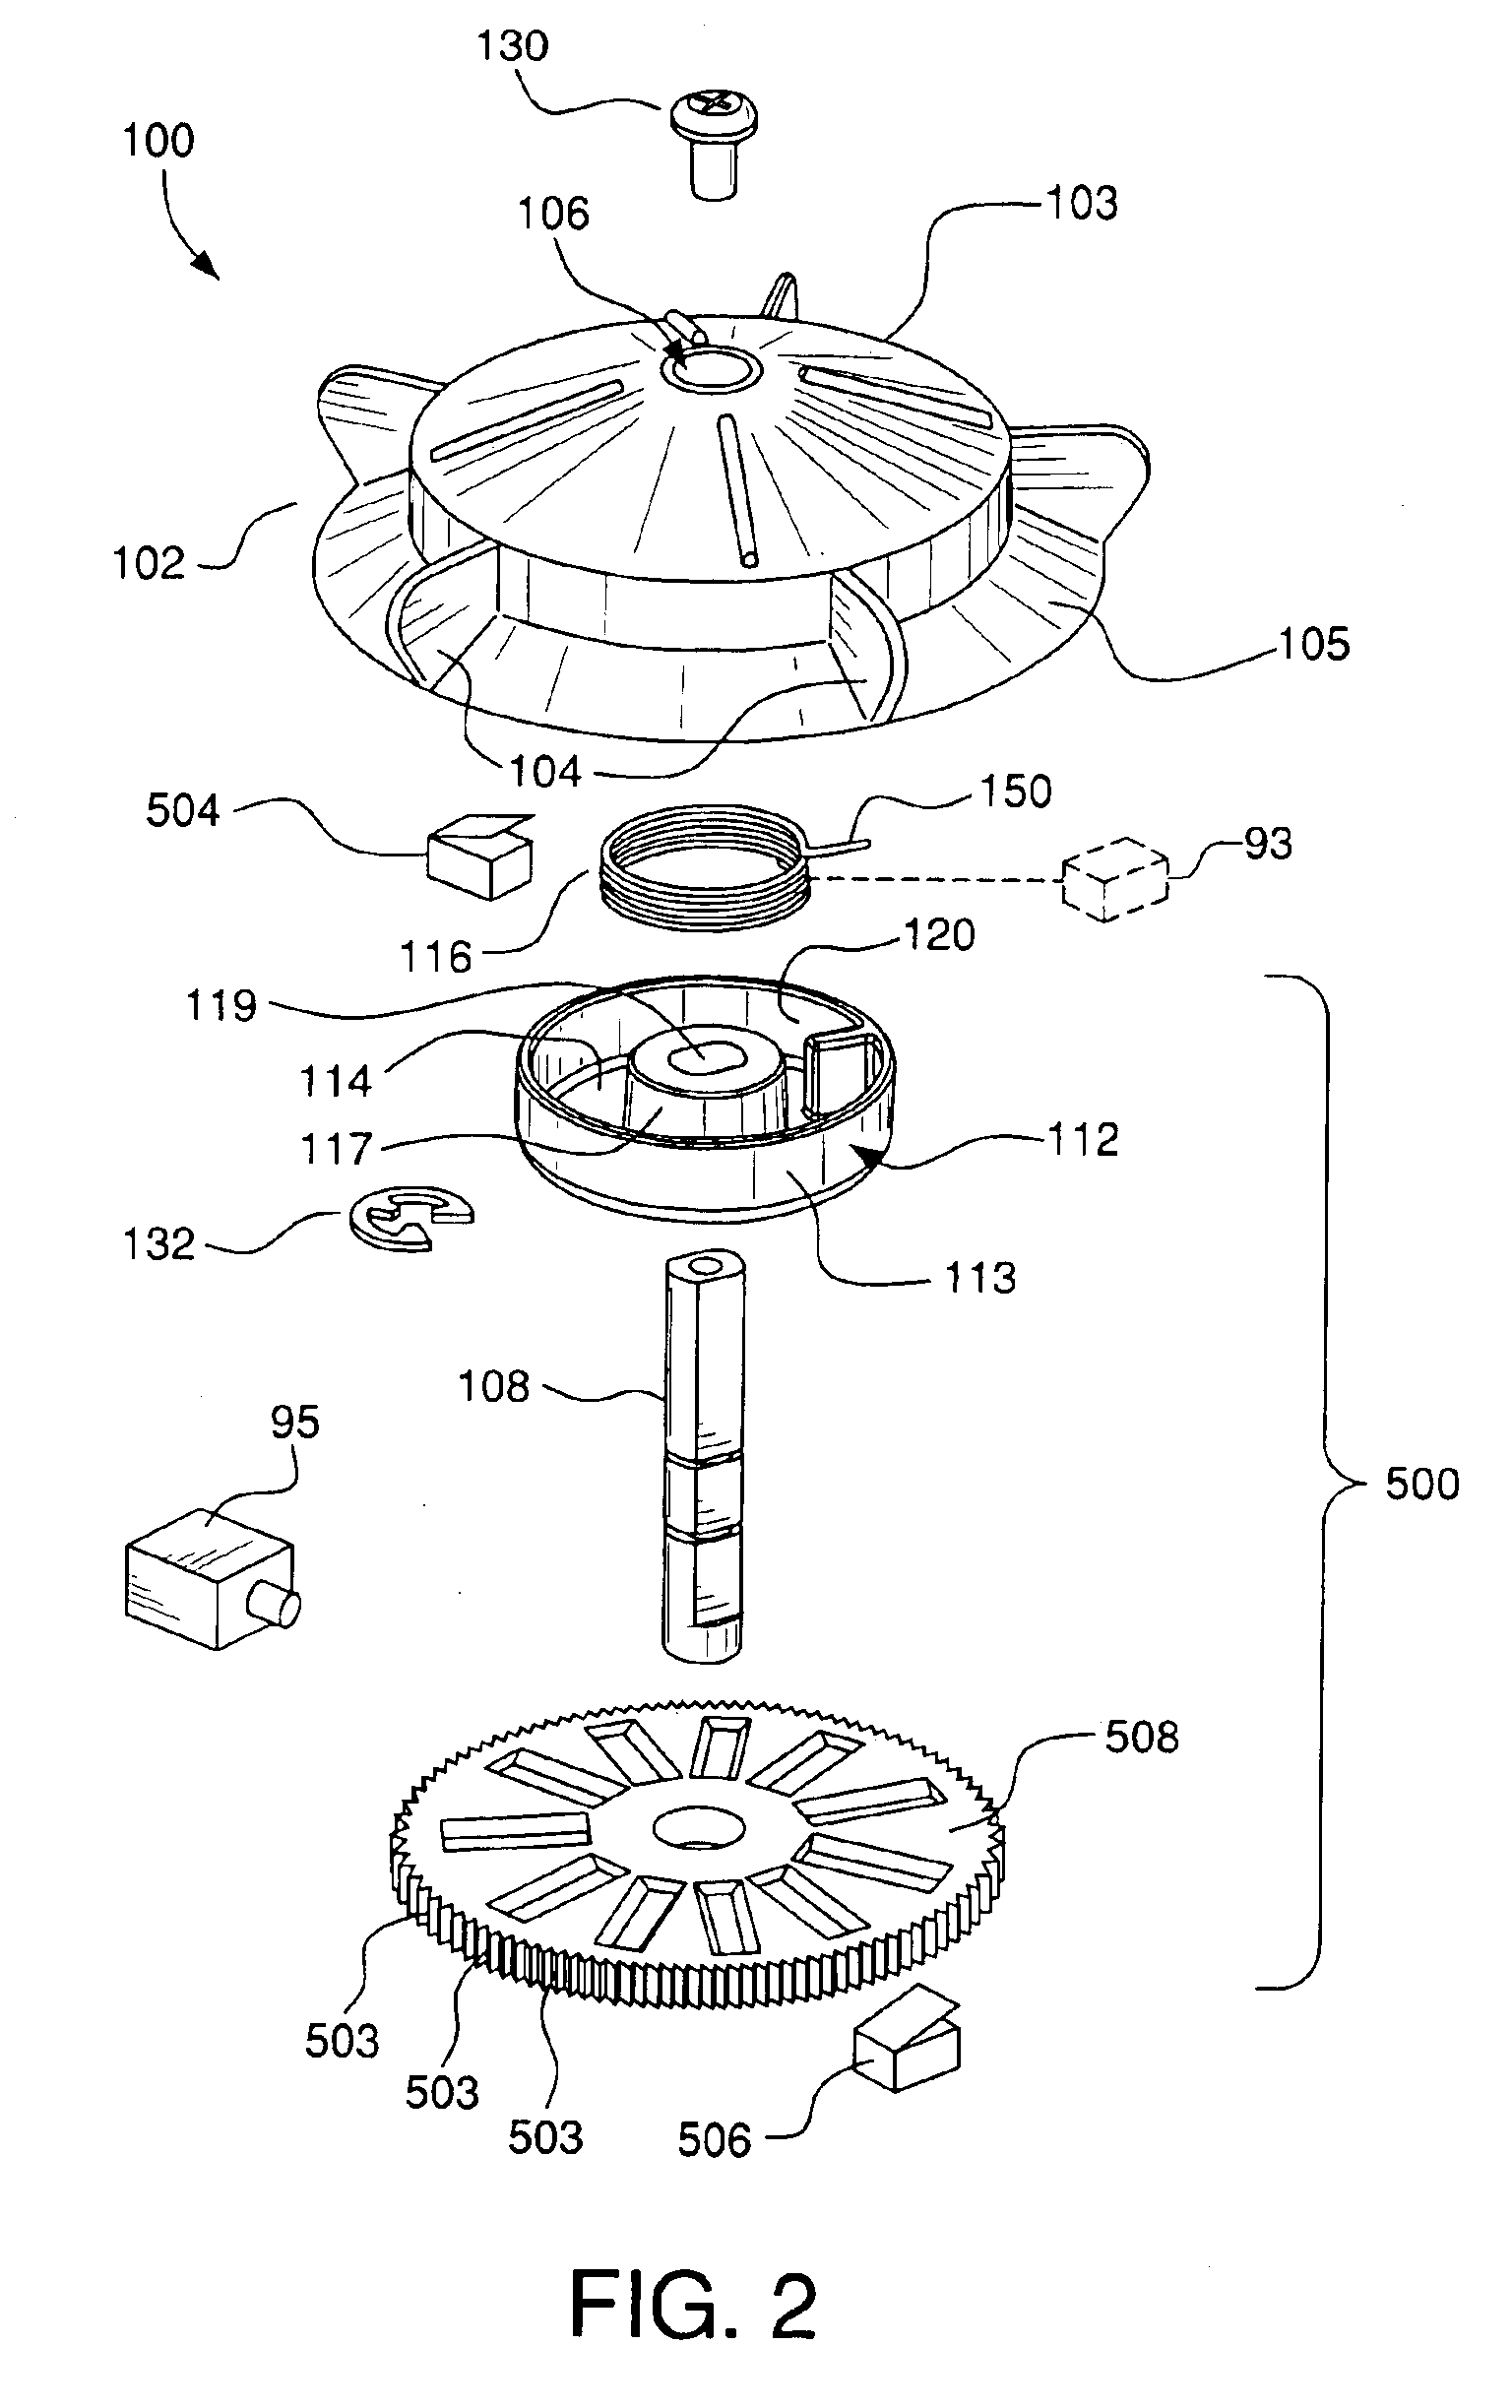 Differential detection system for controlling feed of a paintball loader